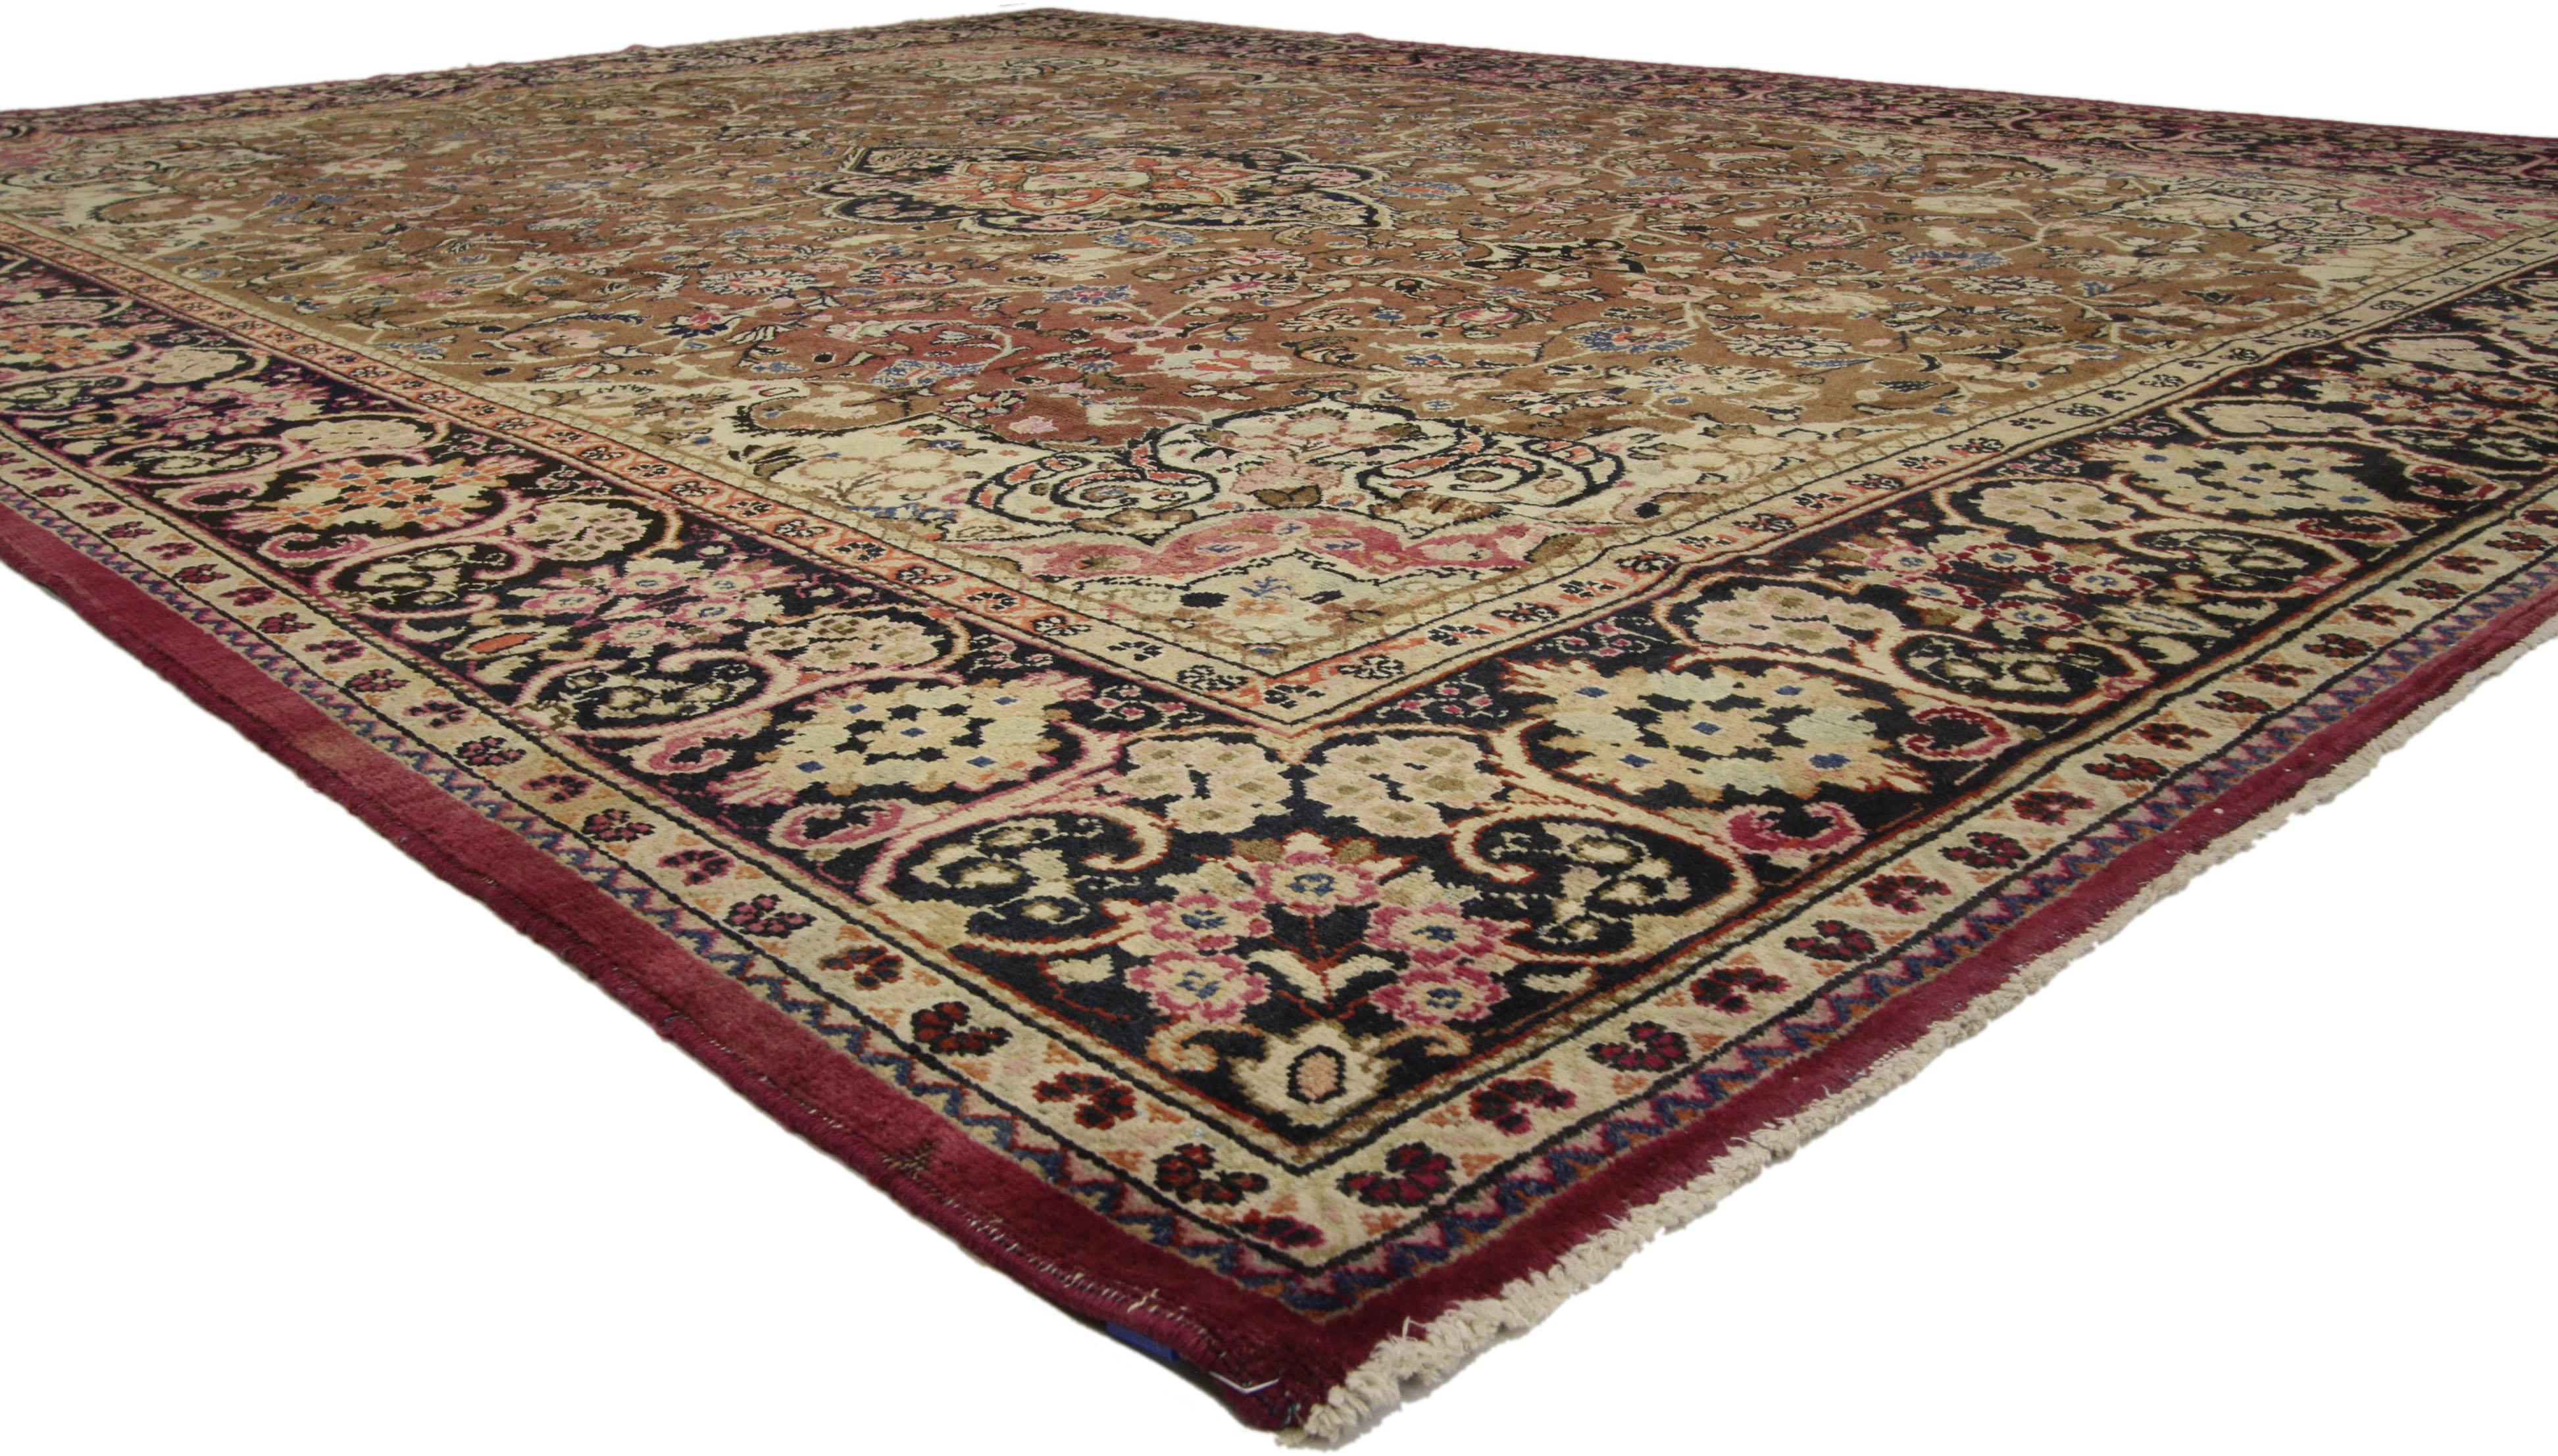 74671 antique Persian Mahal rug with traditional style. This Persian Mahal rug with traditional style features elaborate spandrels and an intricate central lobed medallion with a floating star dotted with flowers on a dark background. The centre